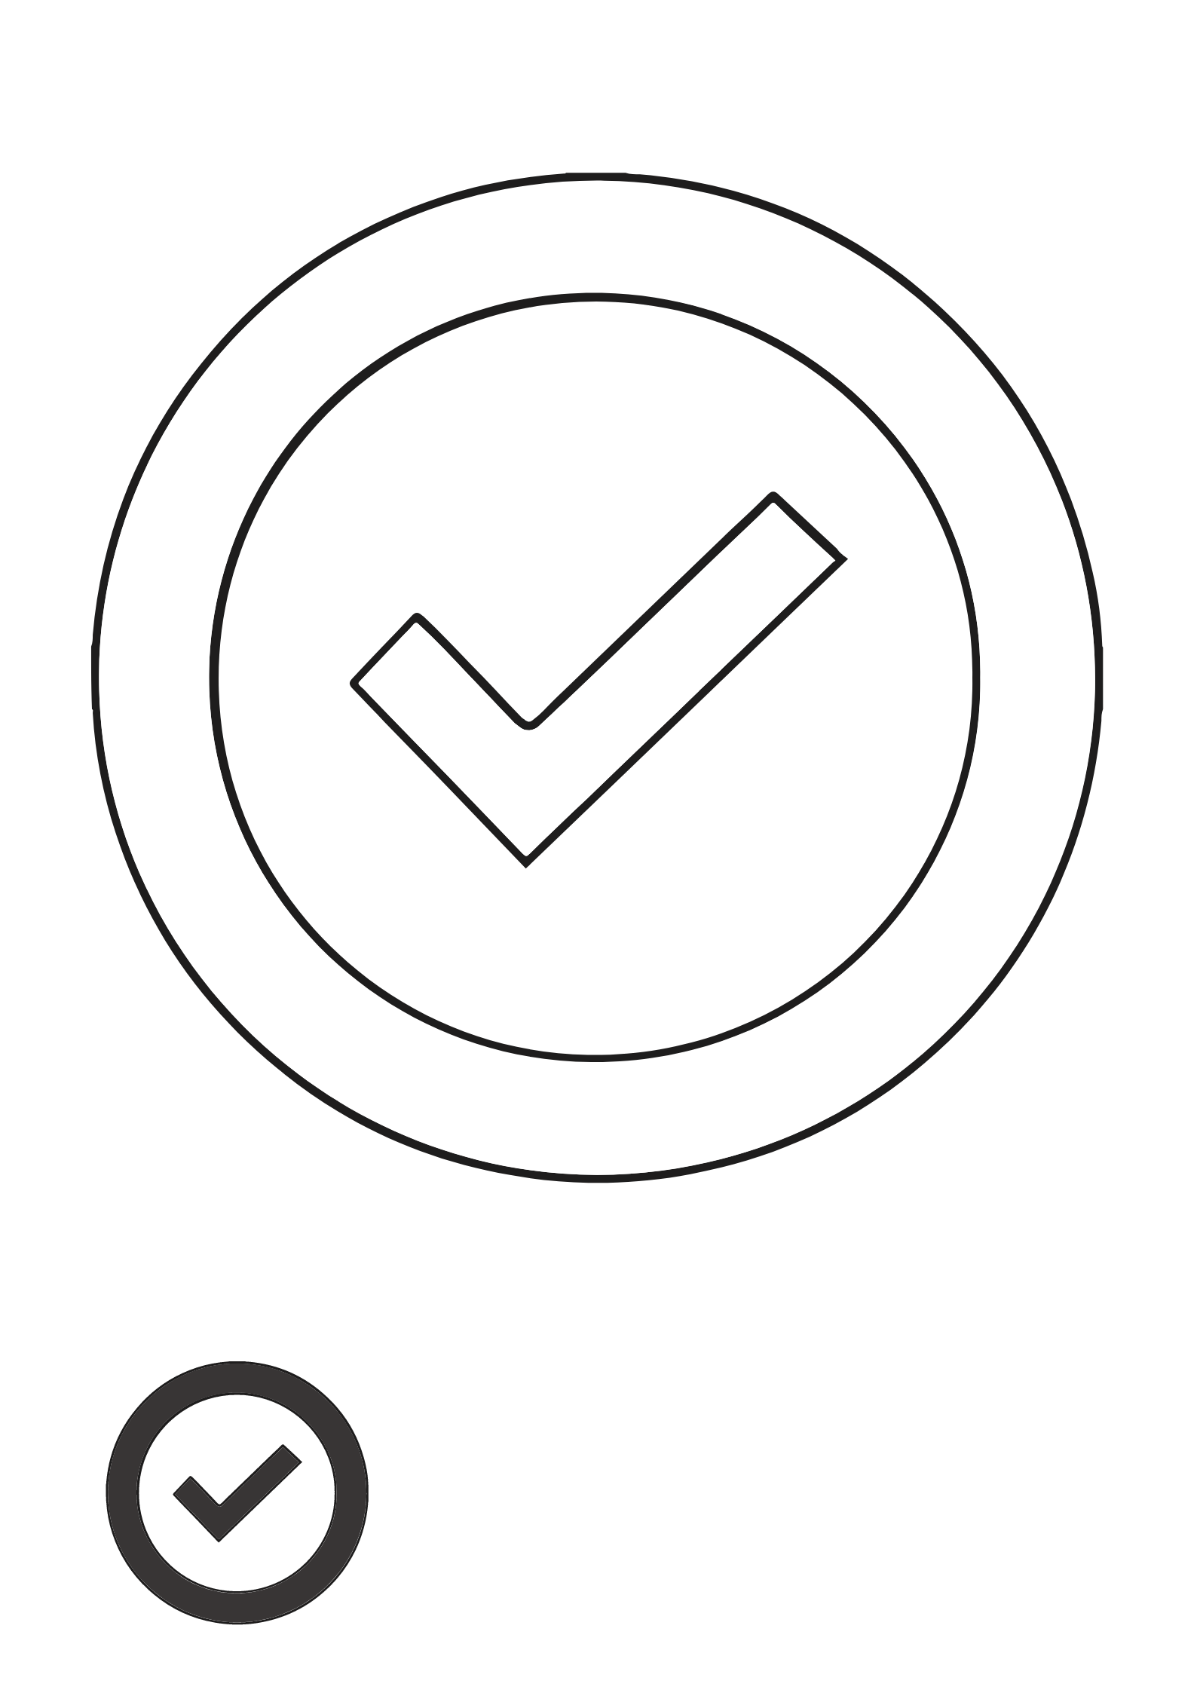 Free Checkmark Icon Coloring Page Template